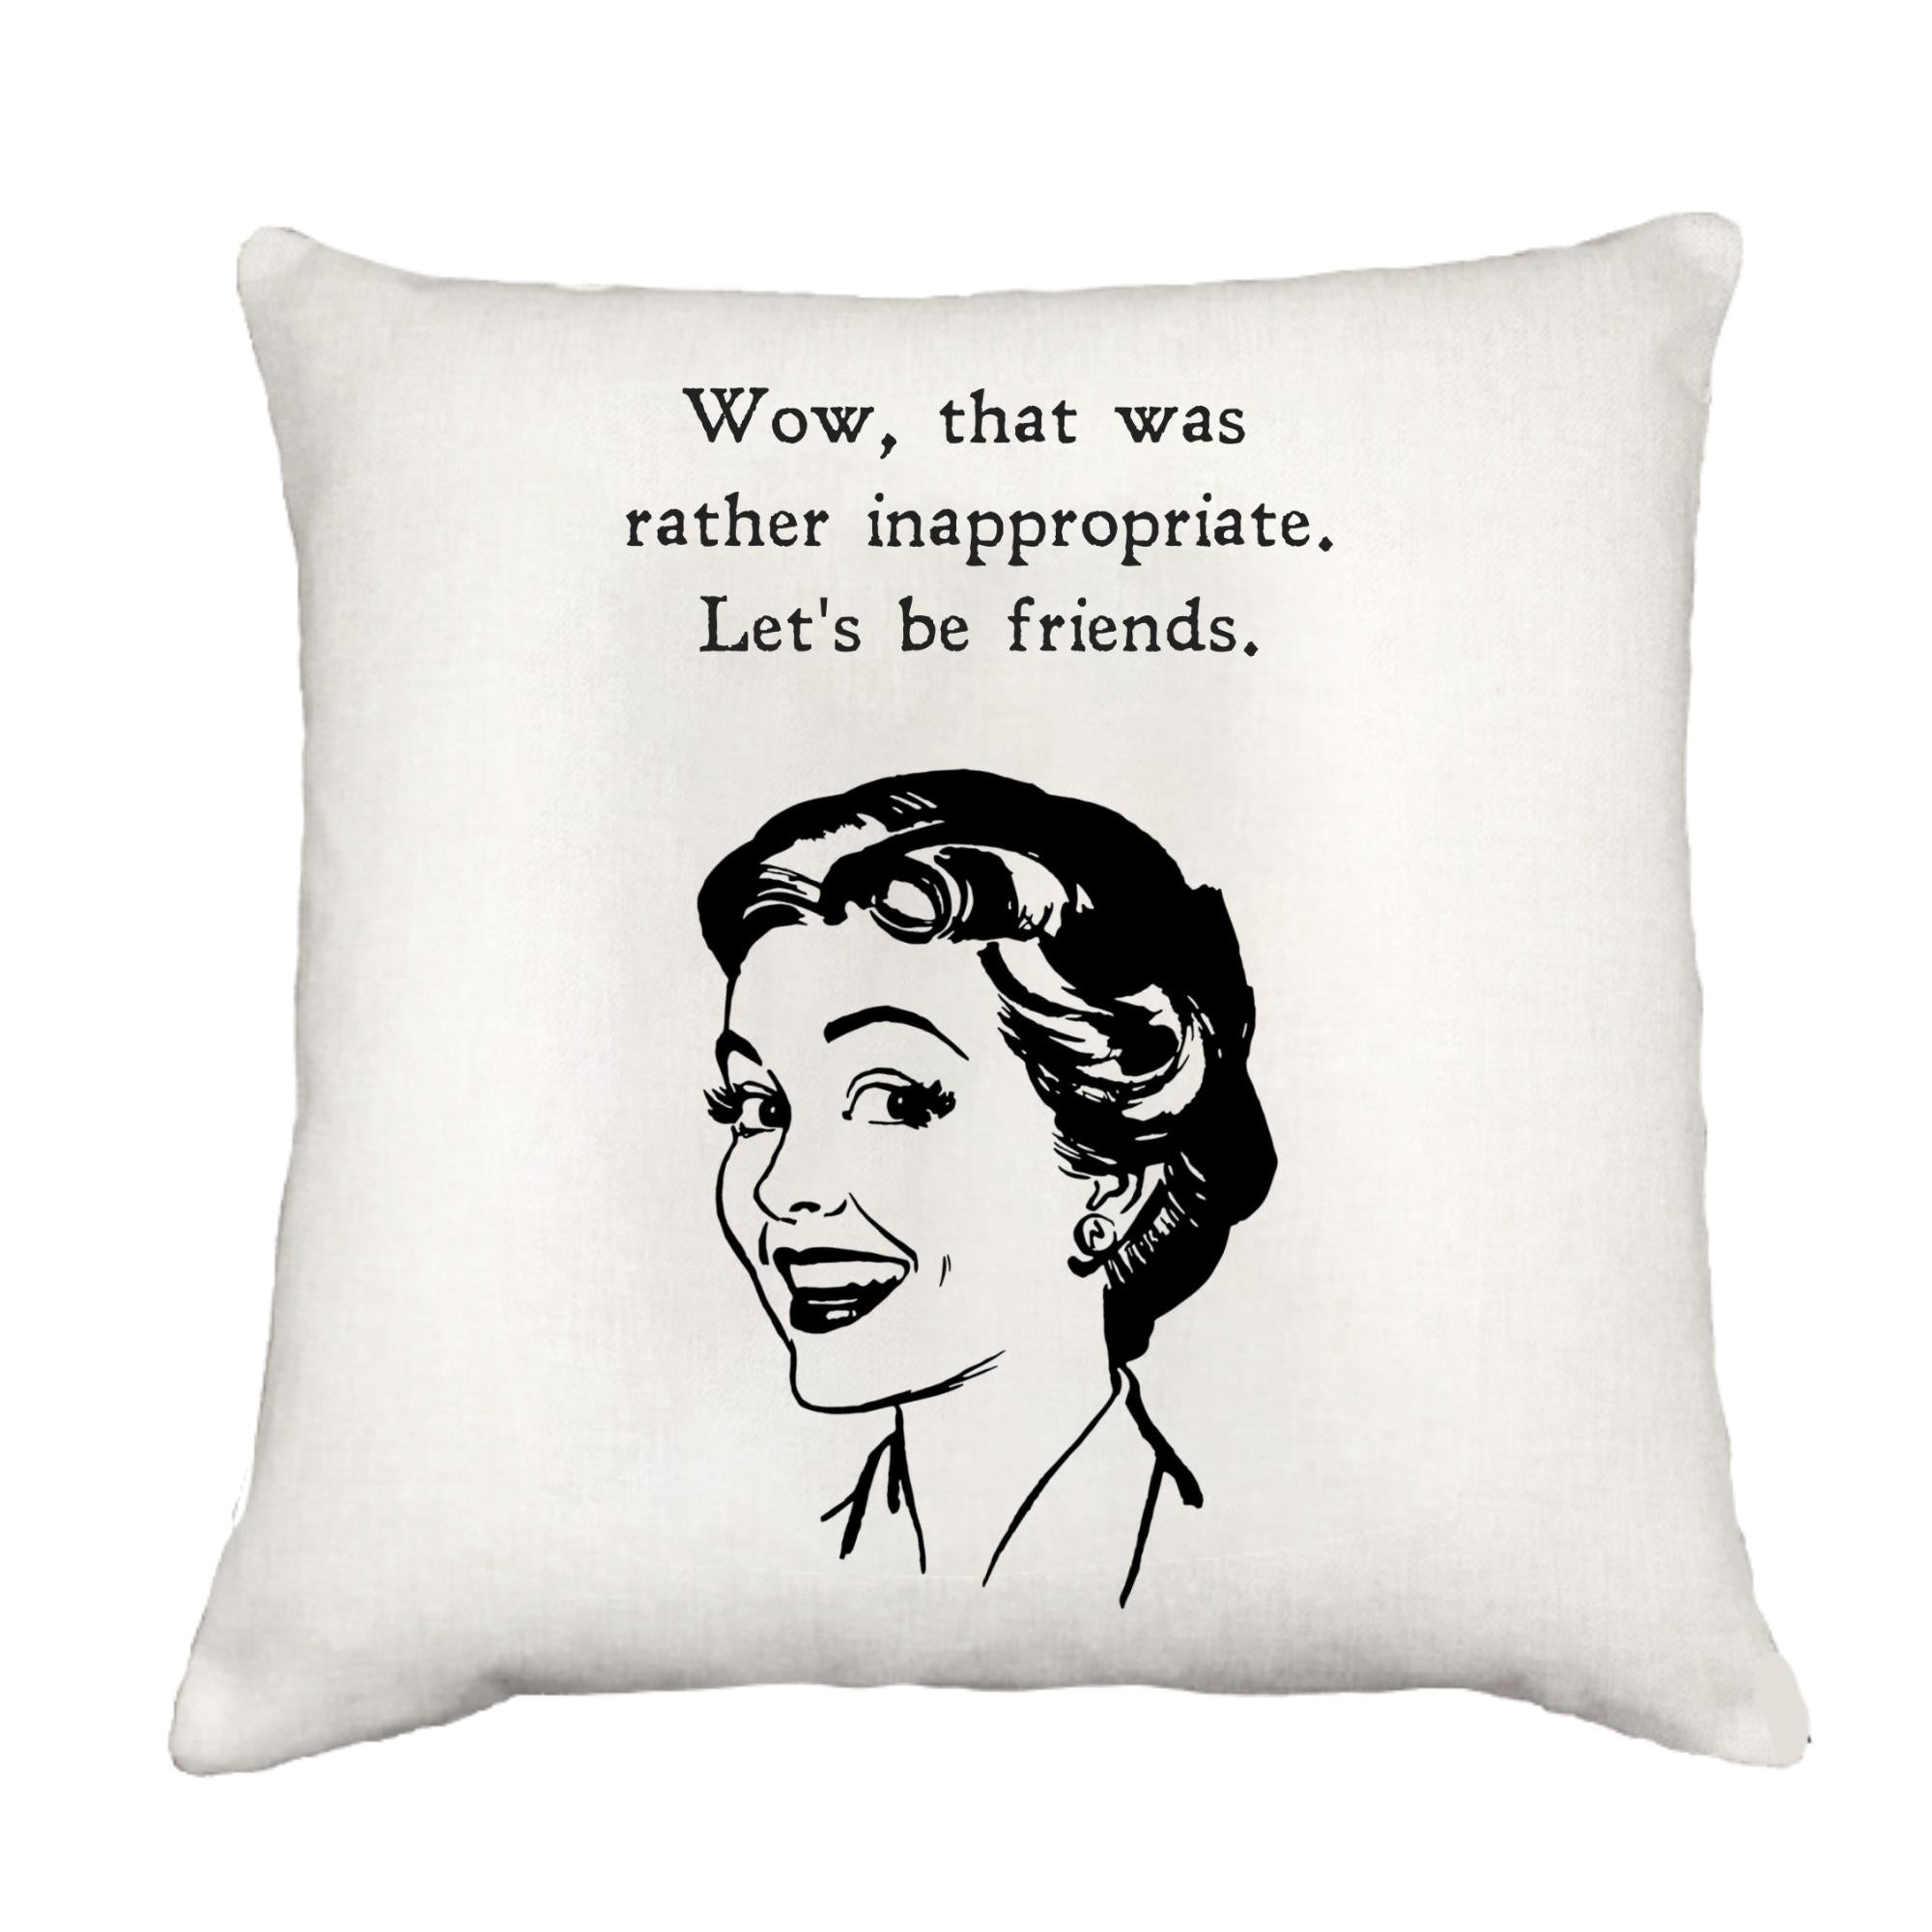 Let's Be Friends Cottage Pillow Throw/Decorative Pillow - Southern Sisters